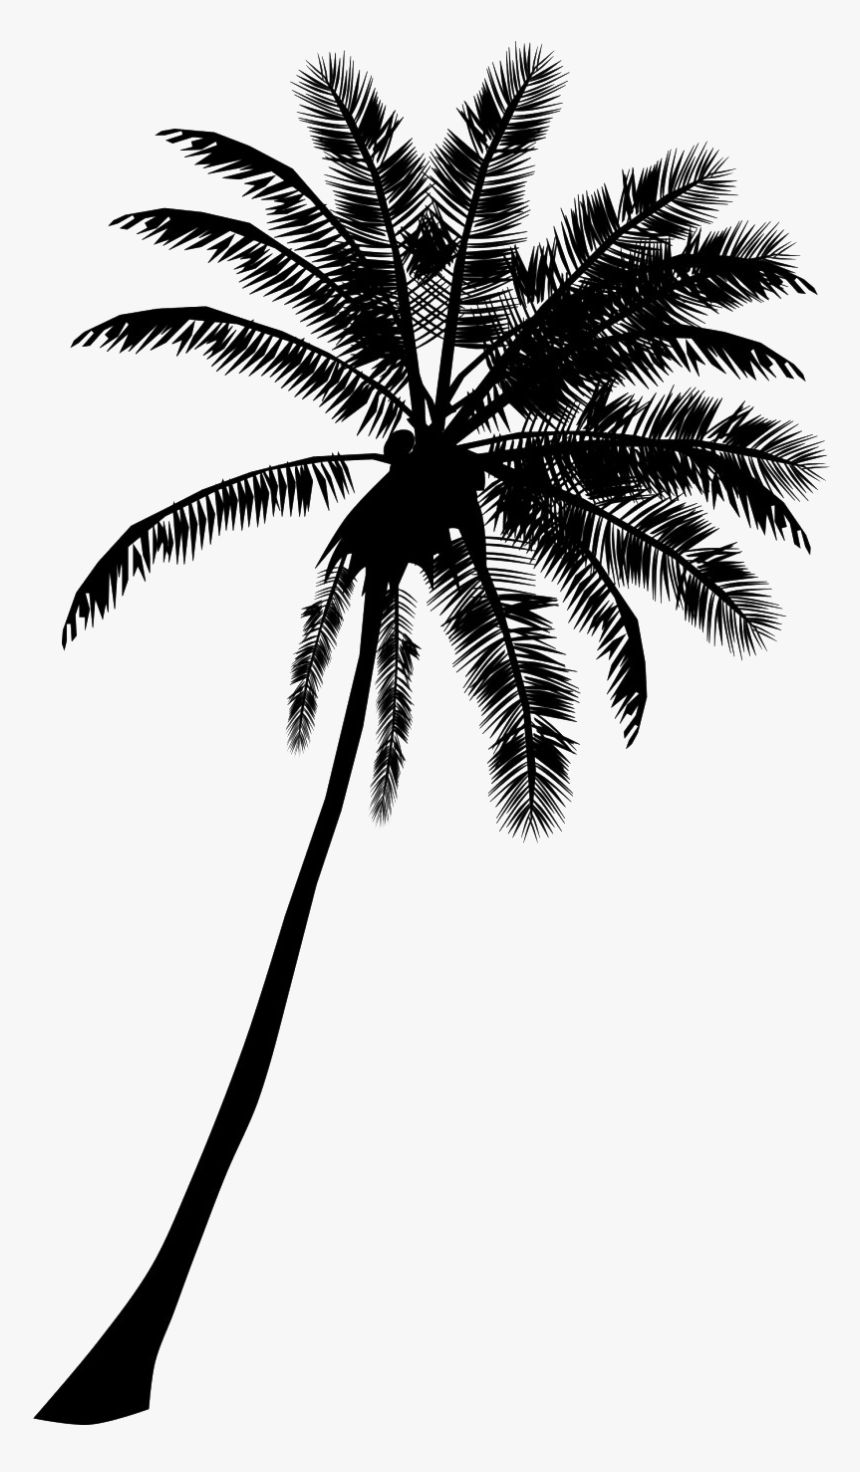 Black Palm Tree Png Hd Quality - Palm Tree Silhouette Clipart, Transparent Png, Free Download